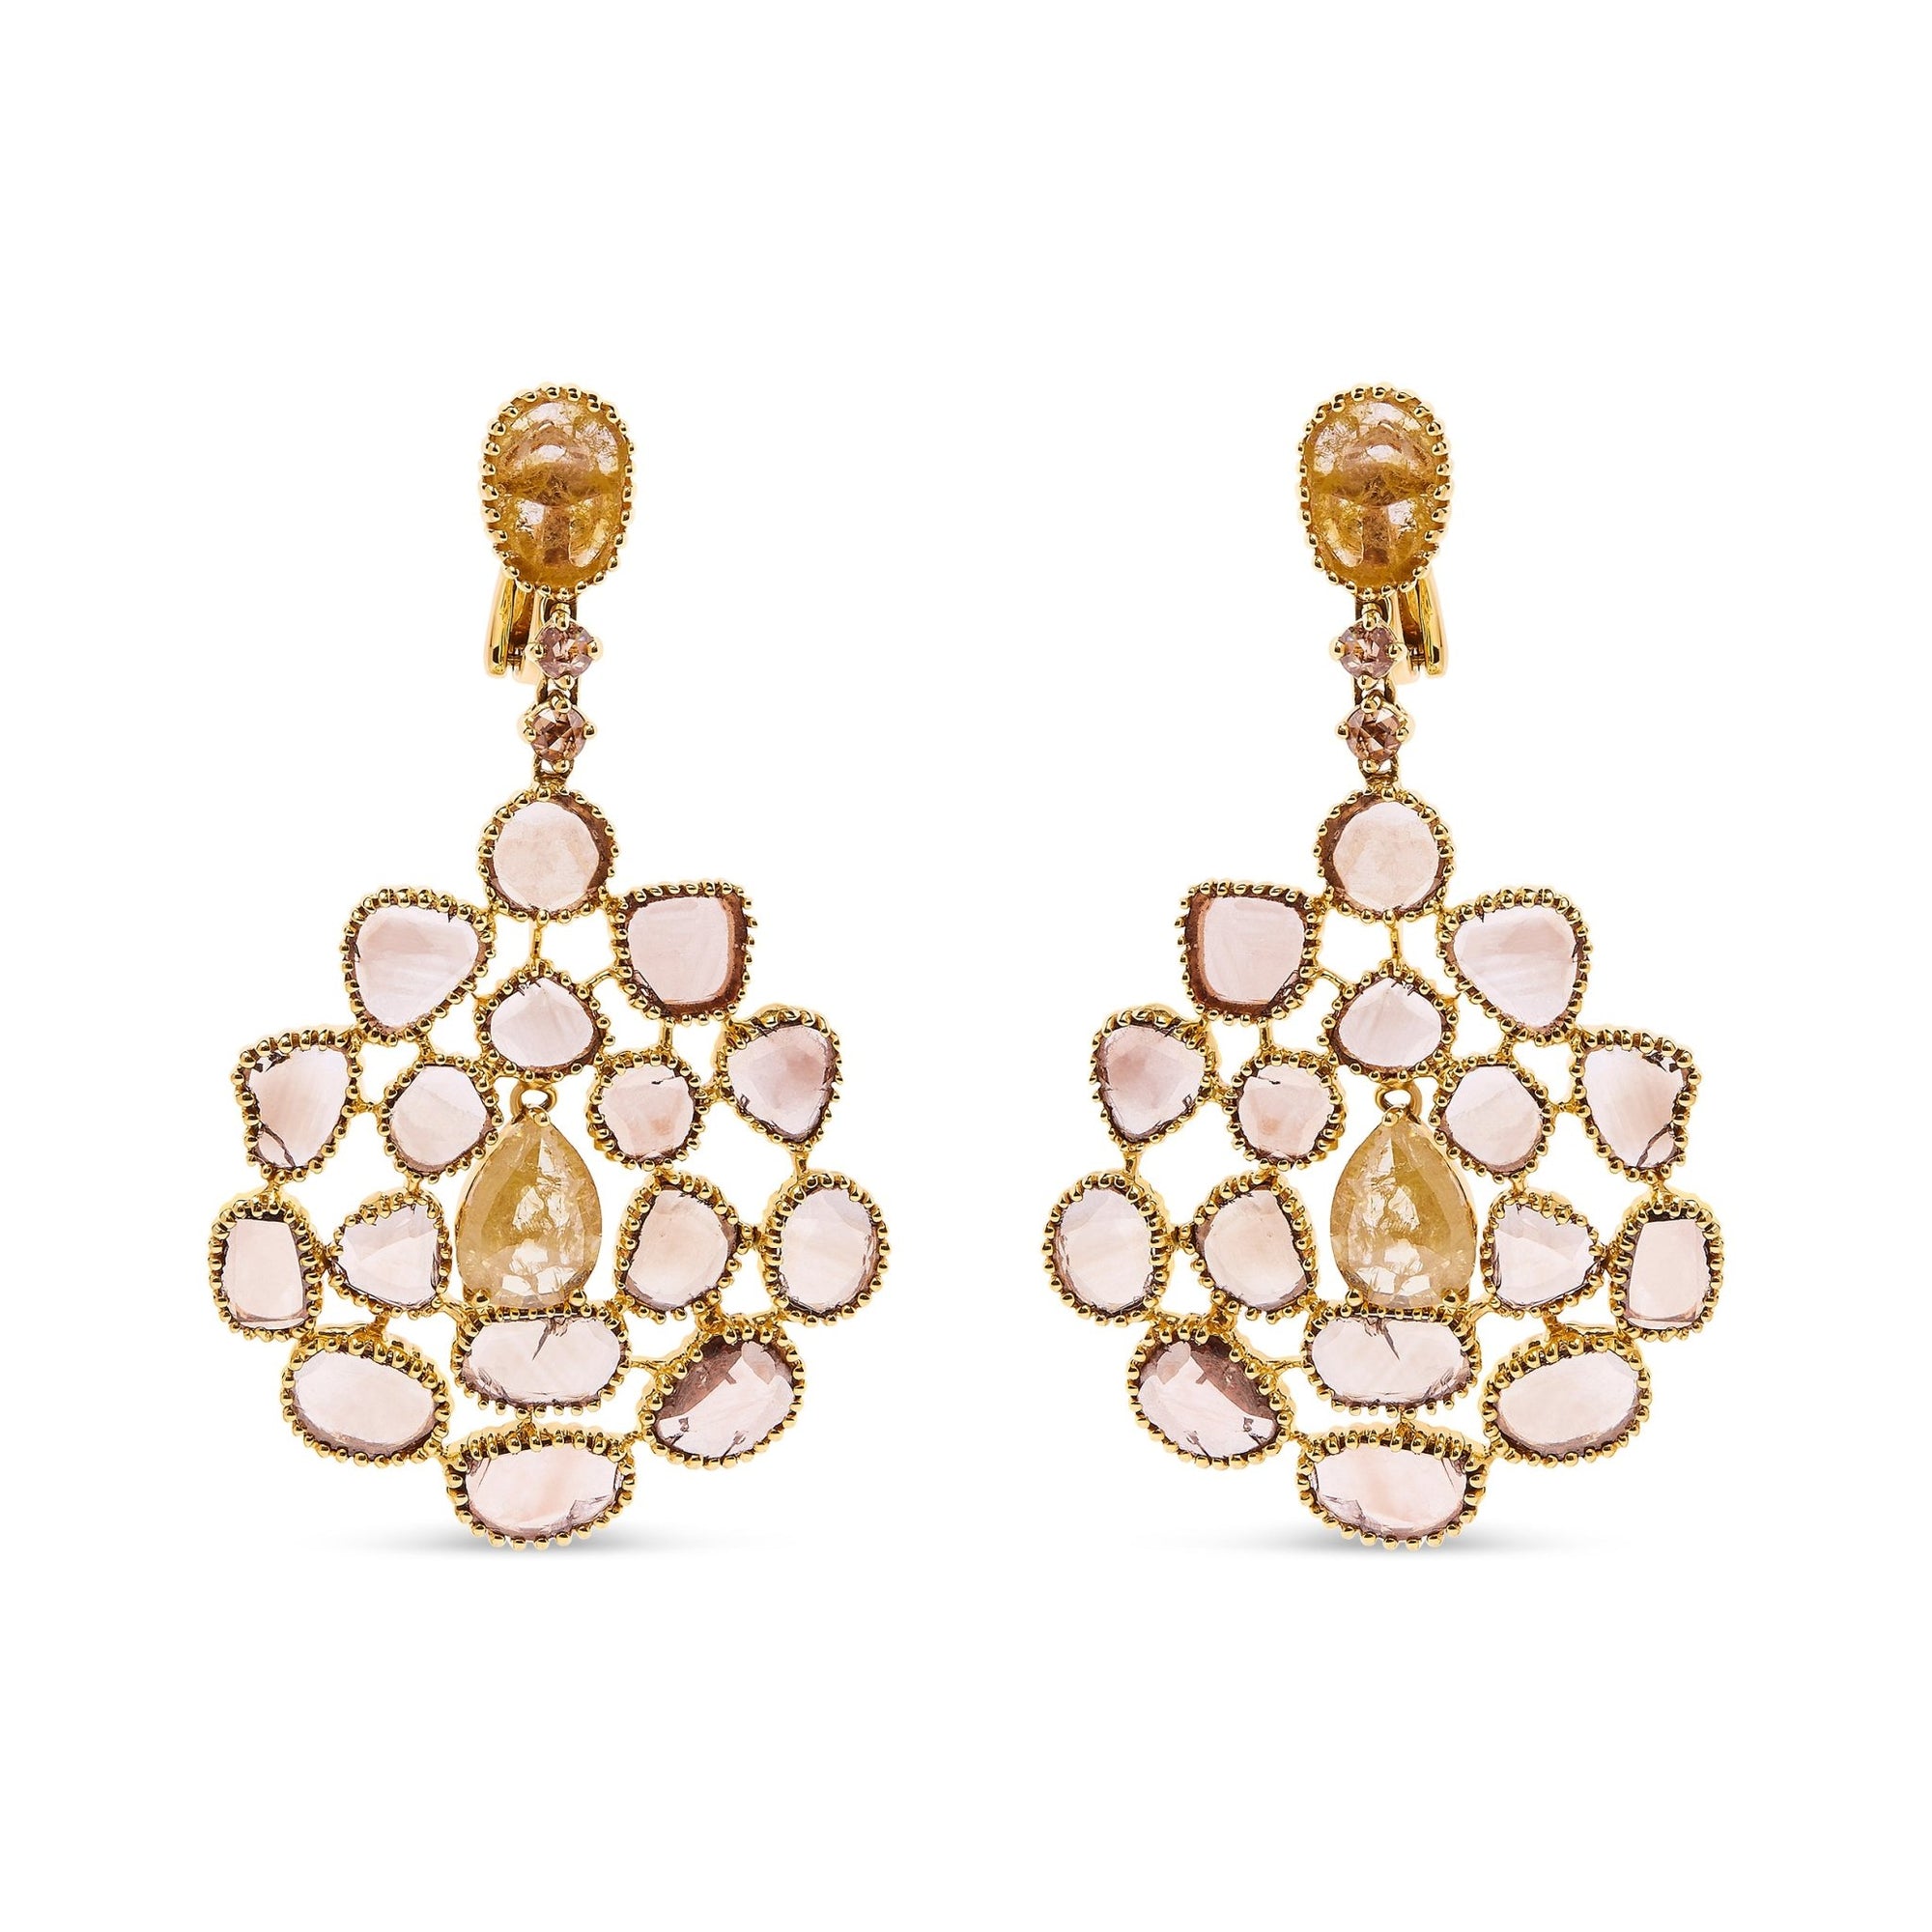 14K Yellow Gold 11 1/5 Cttw Rose Cut and Sliced Diamond Chandelier Style Dangle Earrings (Fancy Color, I2-I3 Clarity) - LinkagejewelrydesignLinkagejewelrydesign